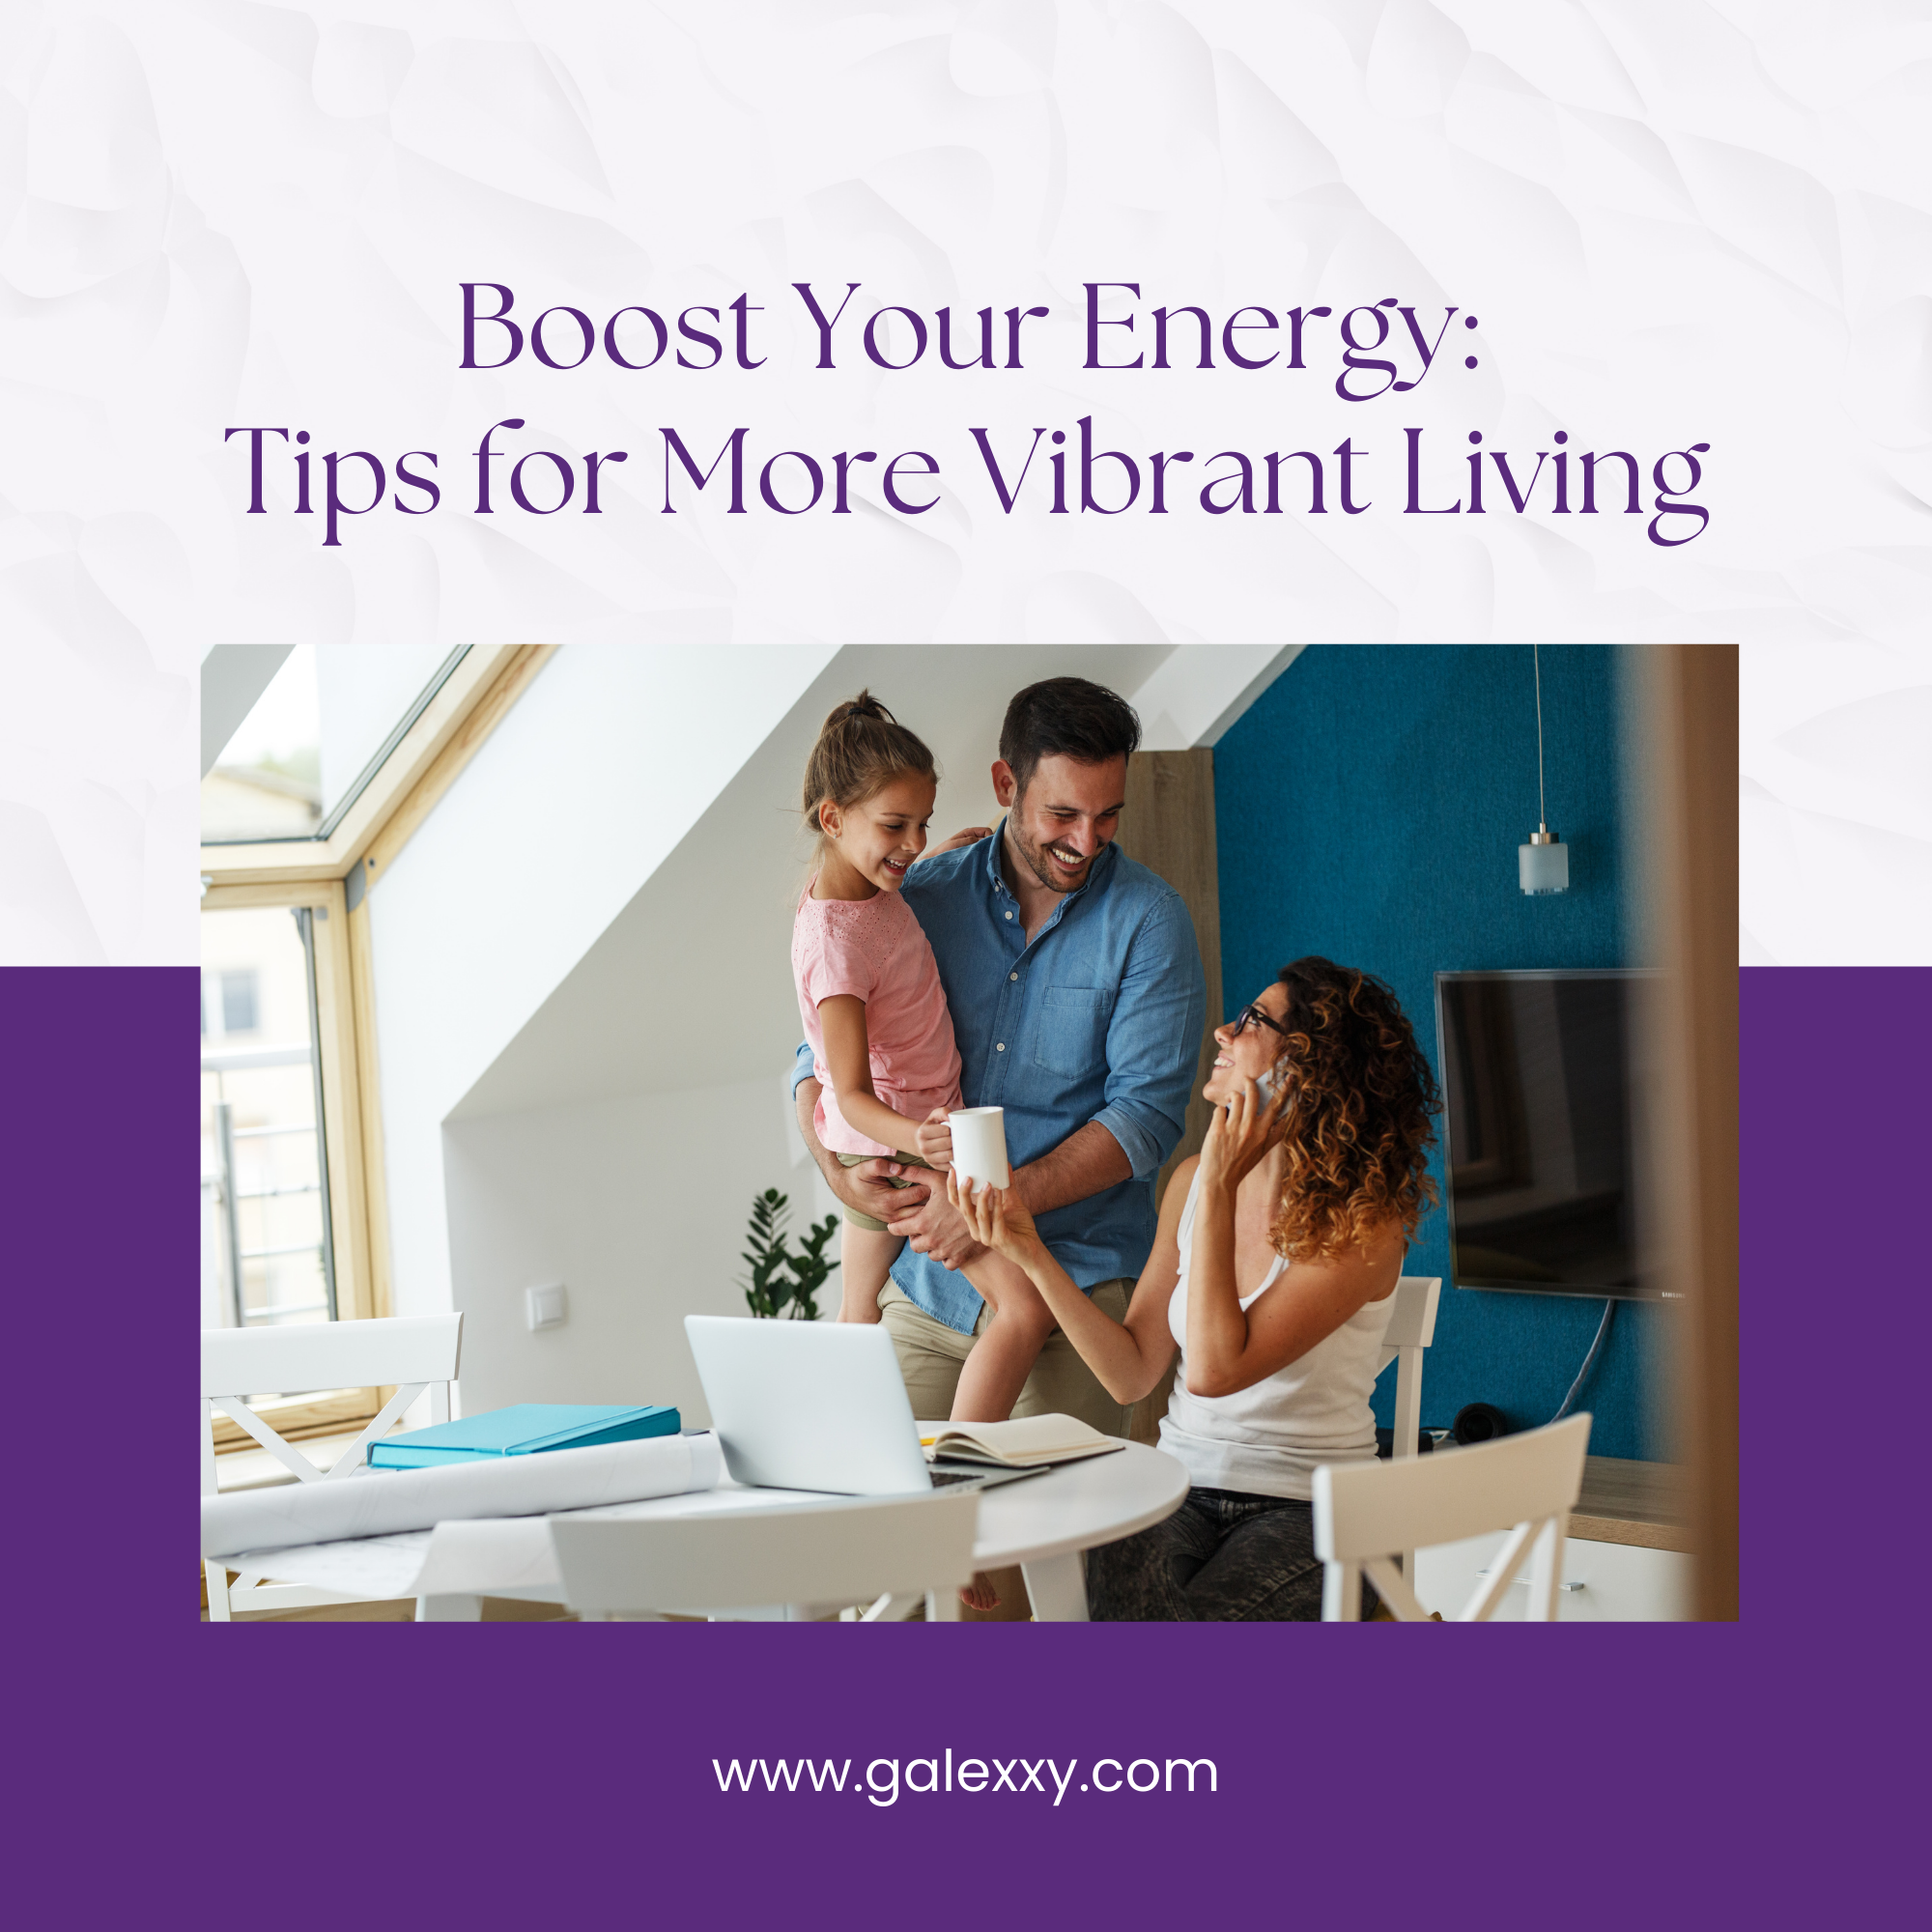 Boost Your Energy: Tips for More Vibrant Living